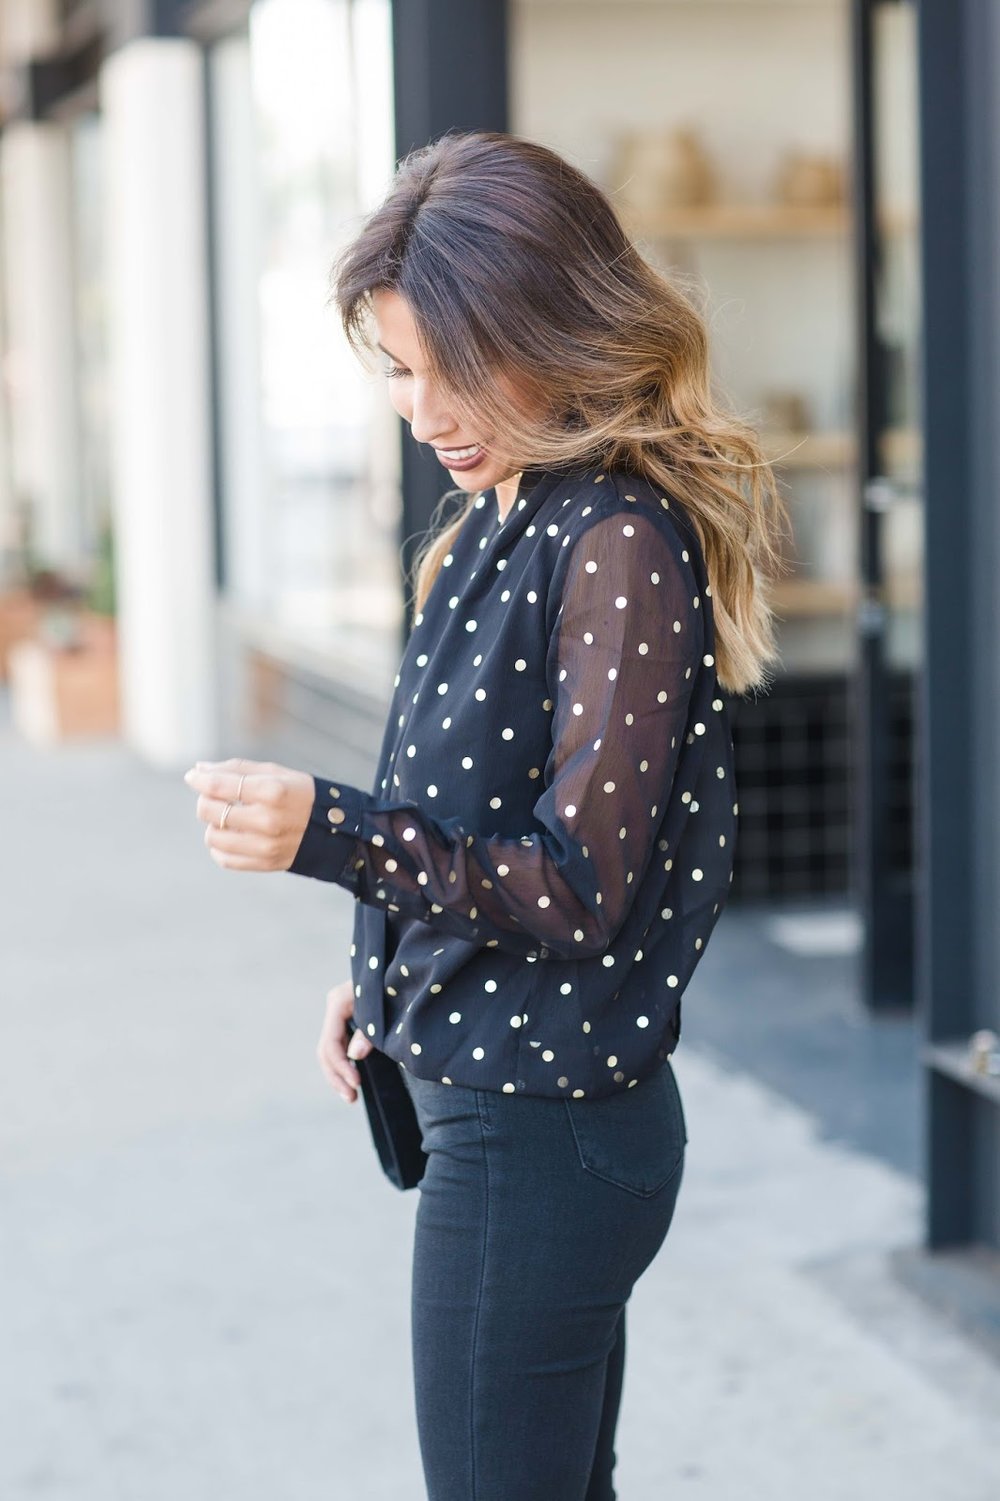 how to wear festive holiday top, holiday outfit ideas, gold polka dot top